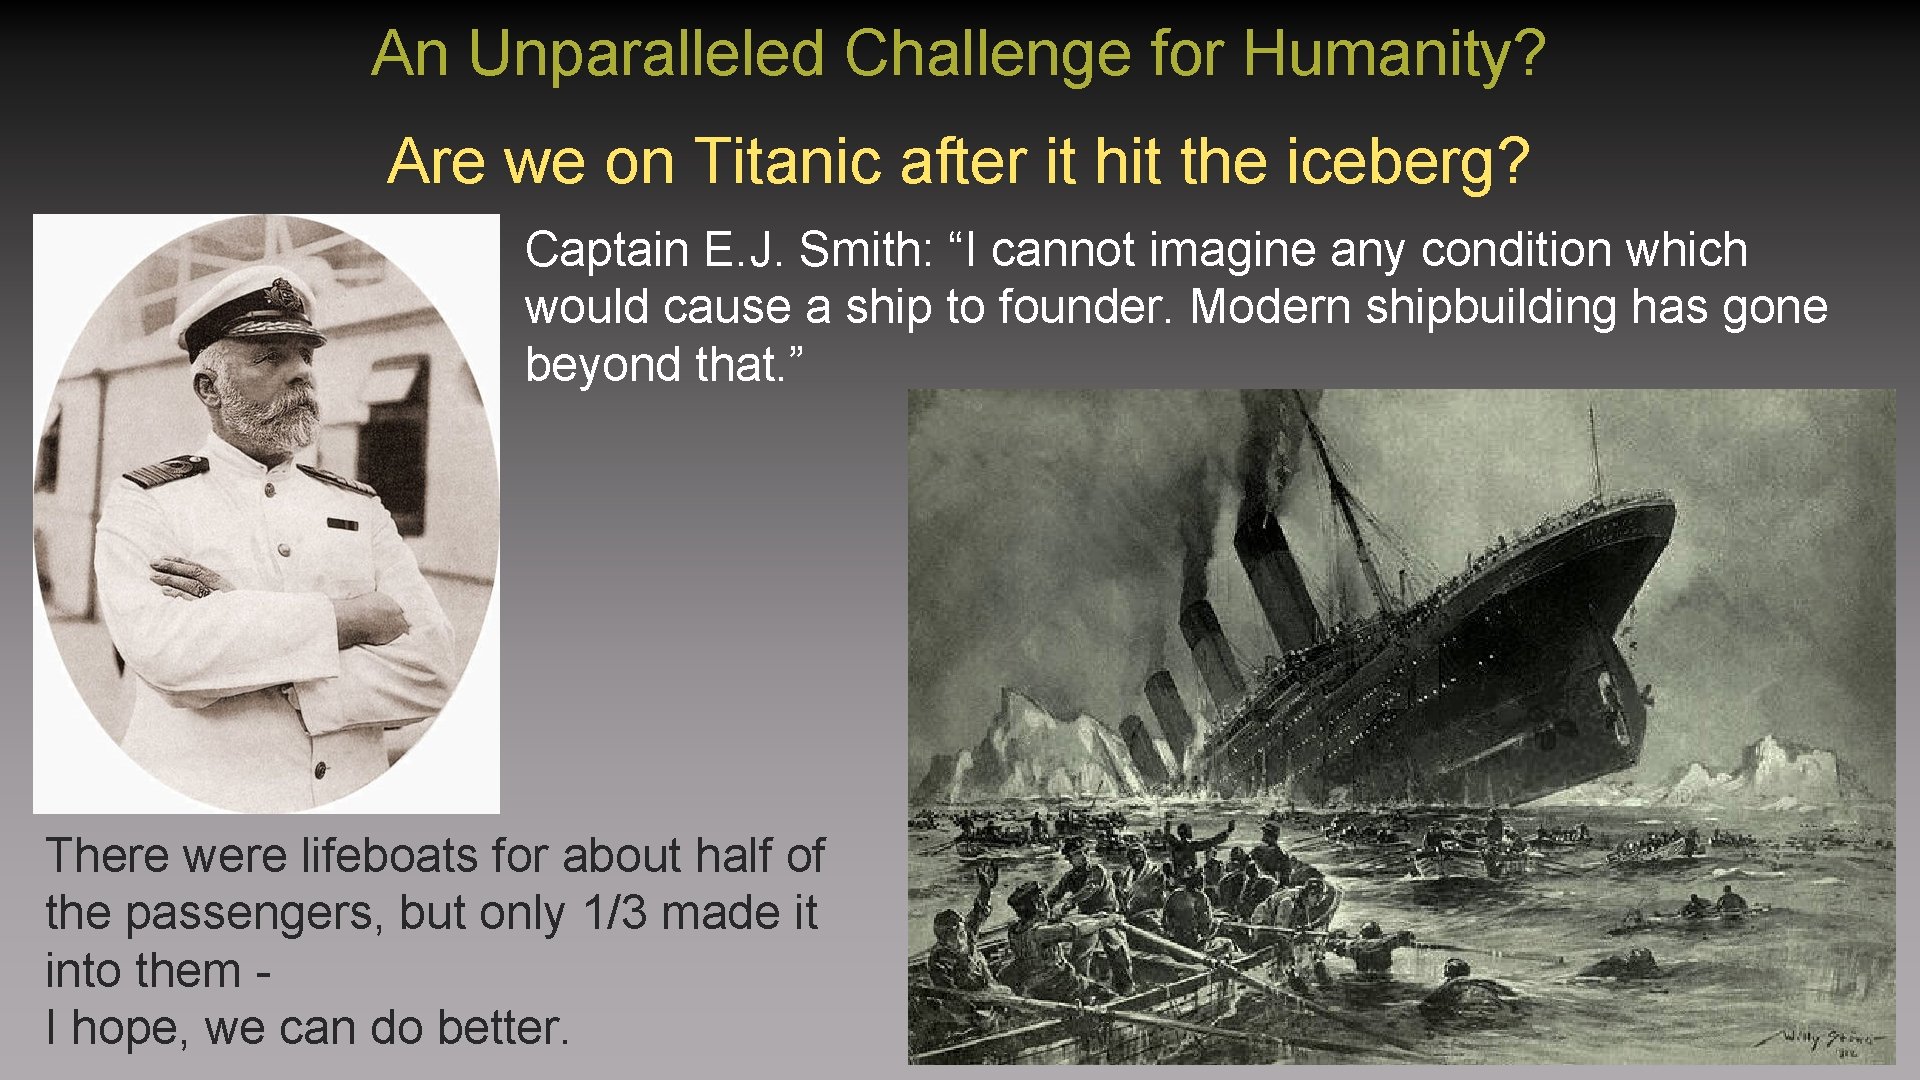 An Unparalleled Challenge for Humanity? Are we on Titanic after it hit the iceberg?